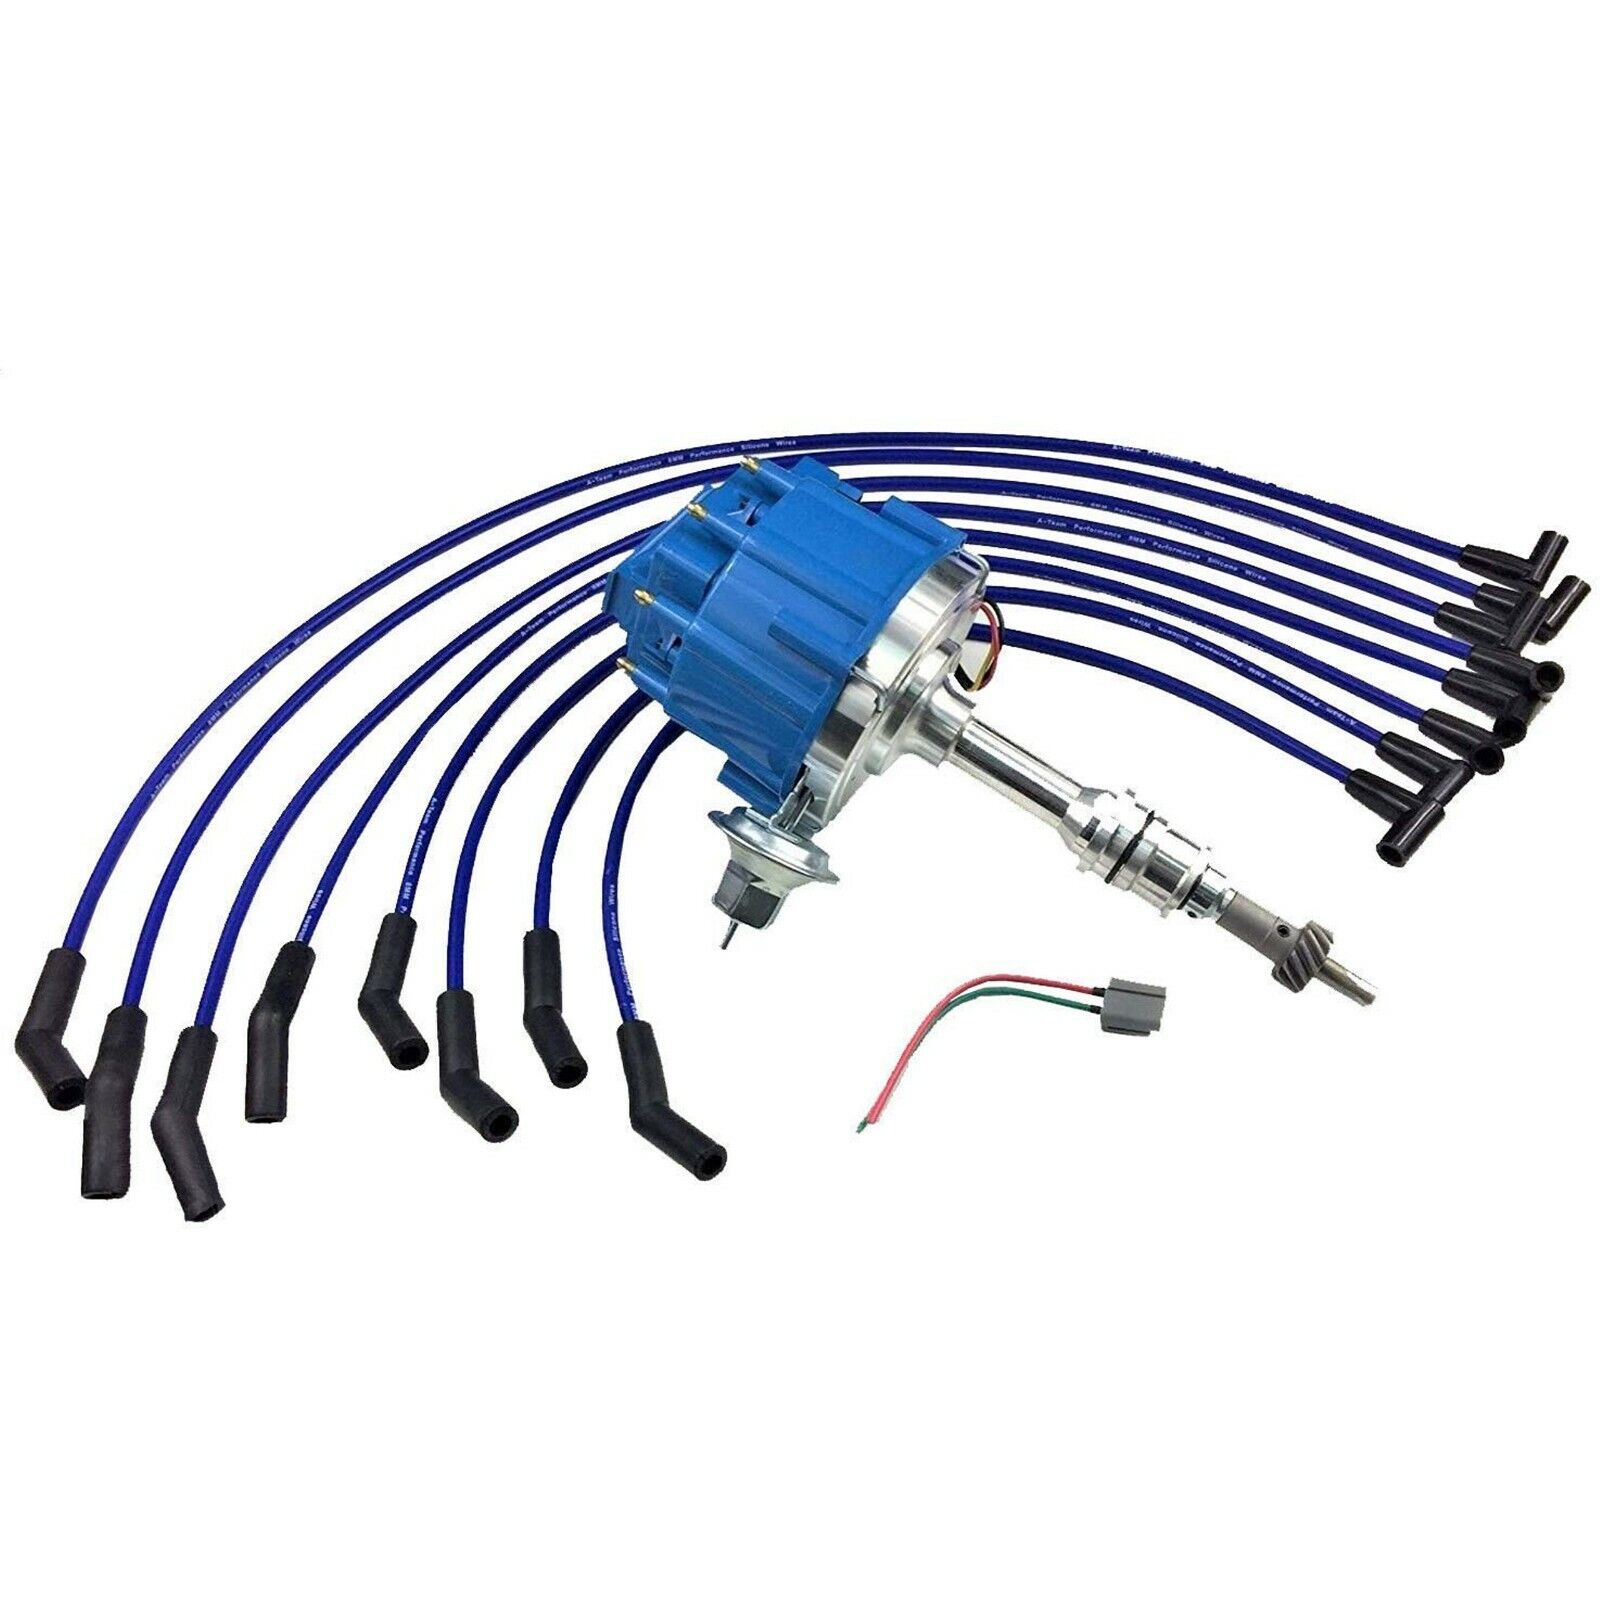 HEI Distributor + 8mm SPARK PLUG WIRES SMALL BOCK FORD SBF 221 260 289 302 BLUE